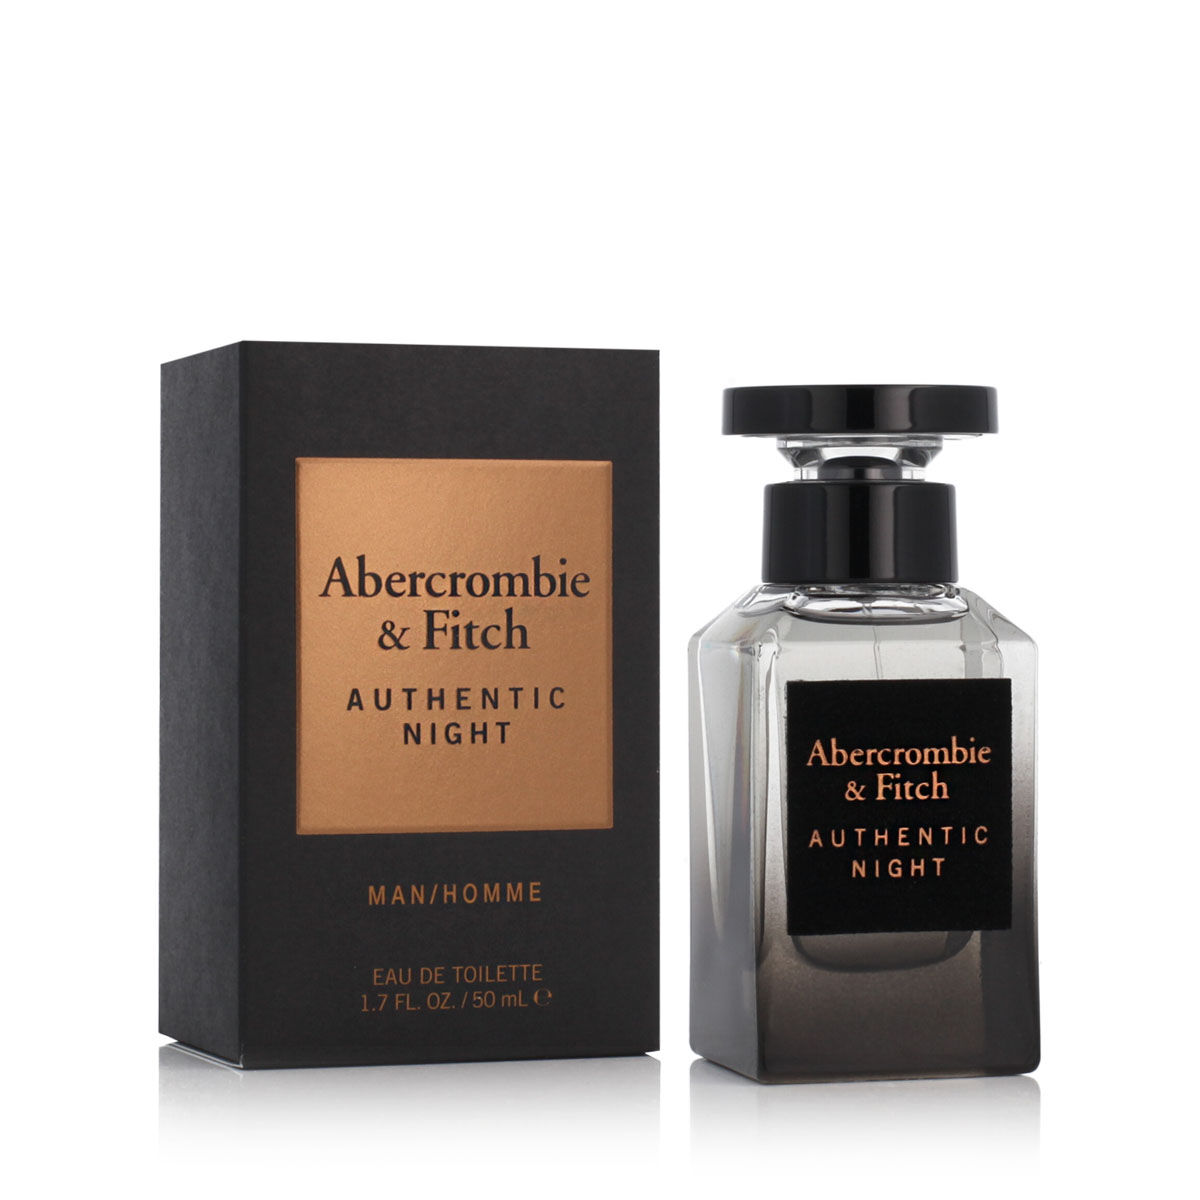 Parfum Homme Abercrombie & Fitch EDT Authentic Night Man 50 ml